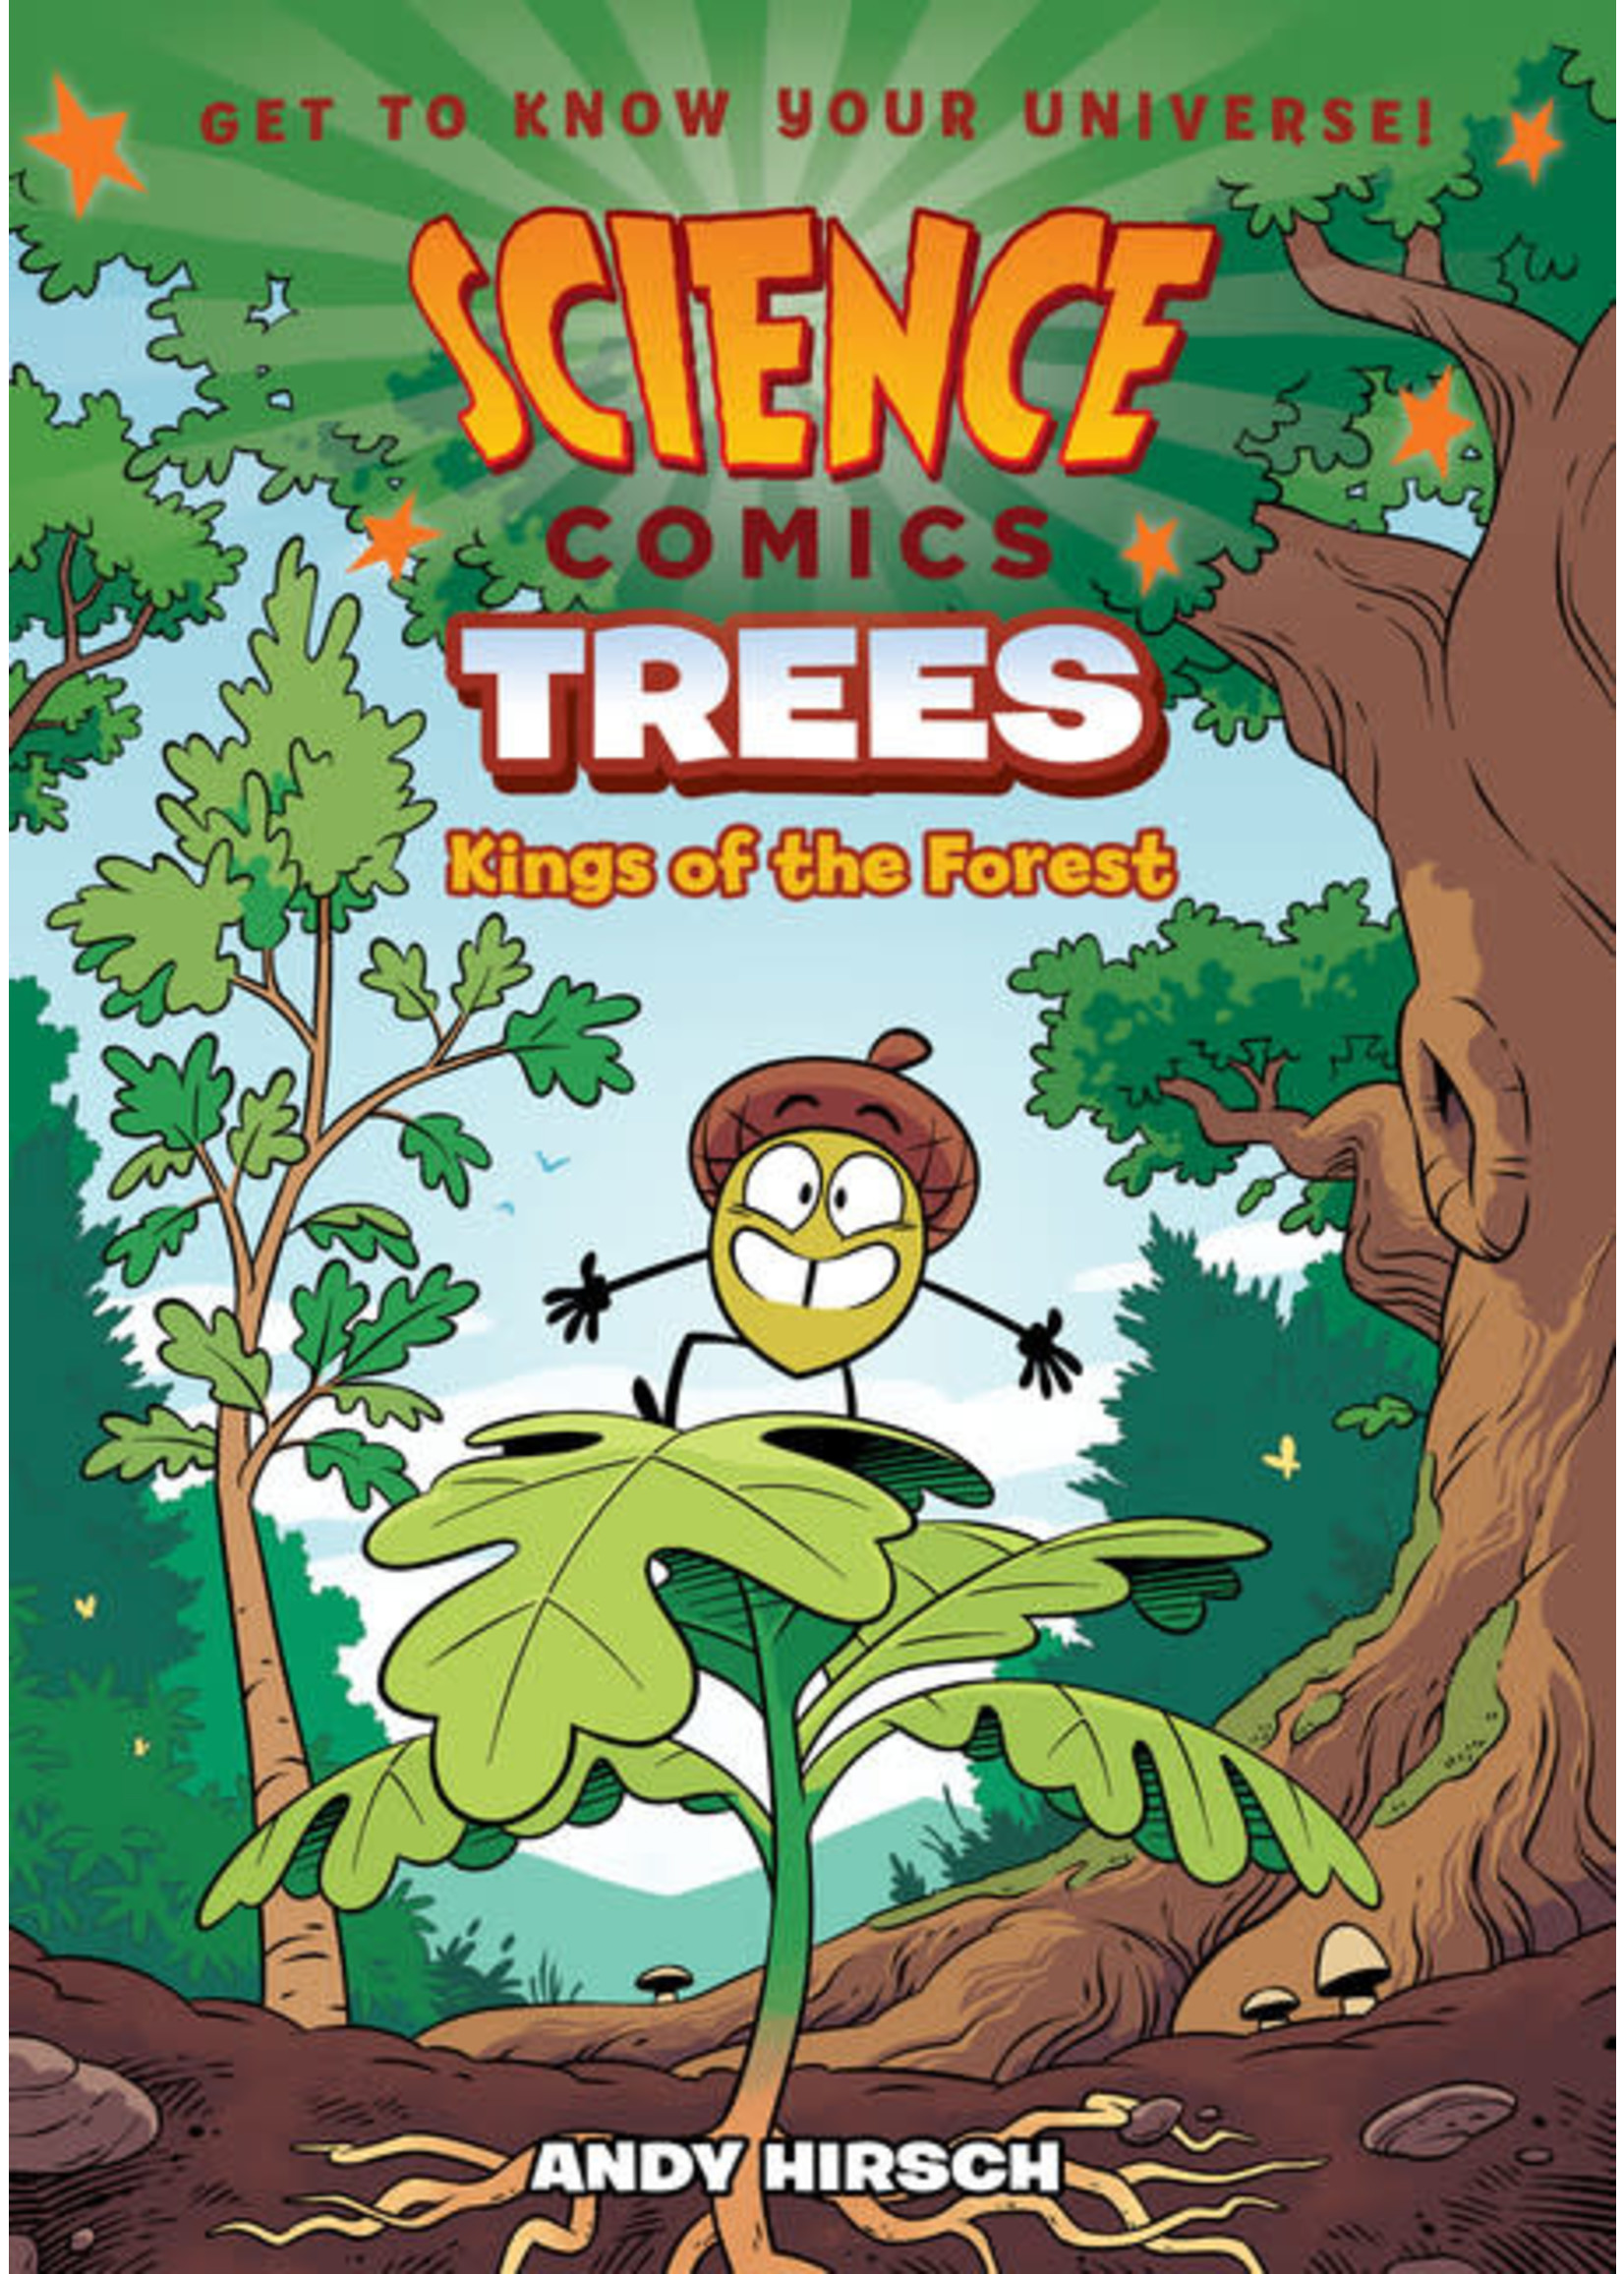 Science Comics: Trees - Kings of the Forest by Andy Hirsch